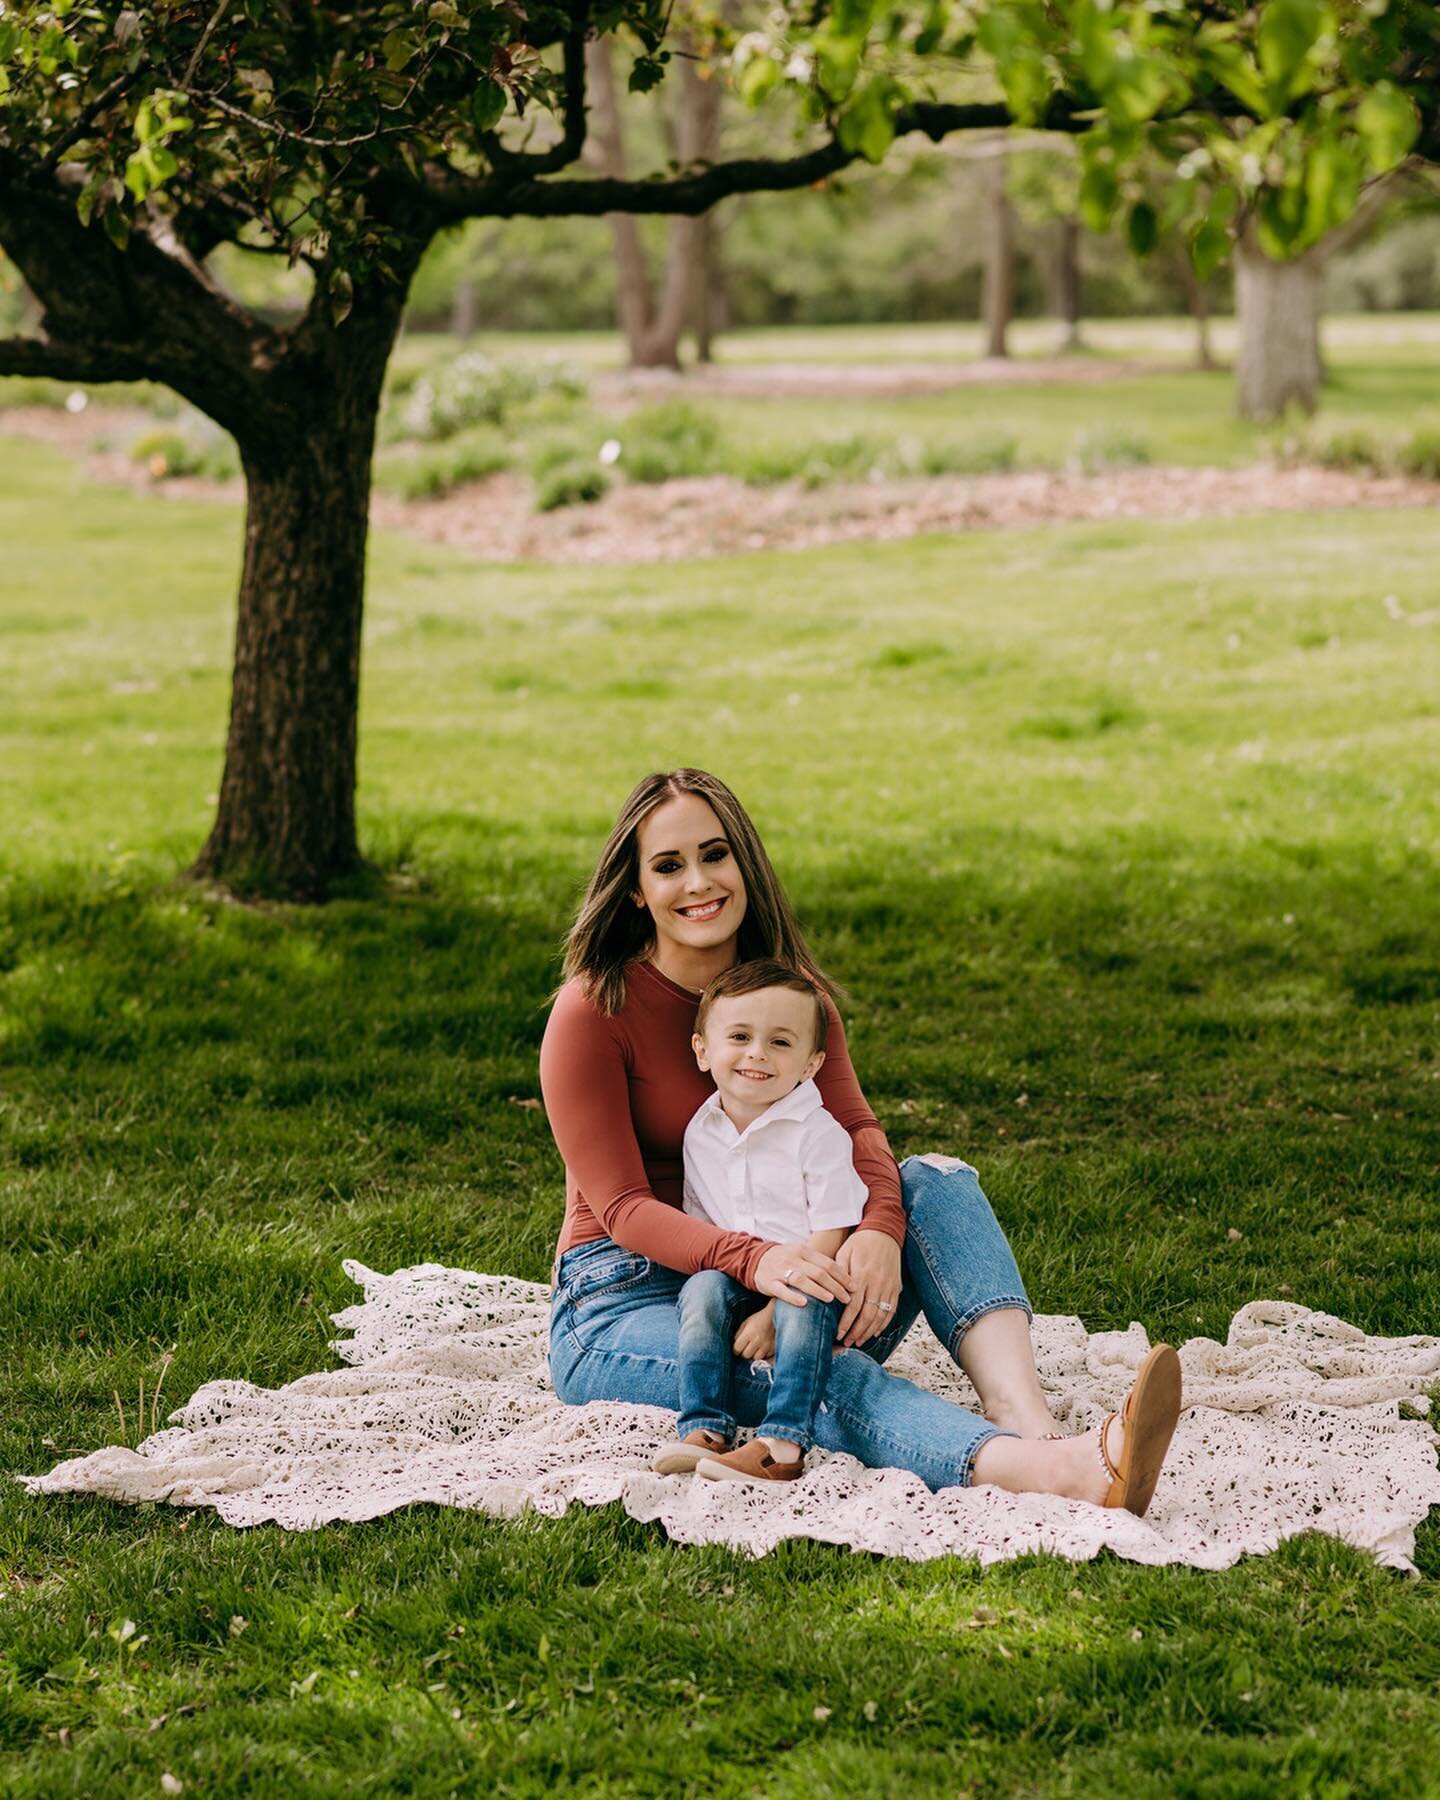 📸🌼 Mommy&amp;Me Minis 🌼📸
⠀⠀⠀⠀⠀⠀⠀⠀⠀
It was SO GREAT to see the Swearingens this past weekend! 
⠀⠀⠀⠀⠀⠀⠀⠀⠀
Ashley&amp;Archer's Mommy and Me Mini session was filled with sunshine and priceless moments. 🌞
⠀⠀⠀⠀⠀⠀⠀⠀⠀
💕 With candid shots showcasing the